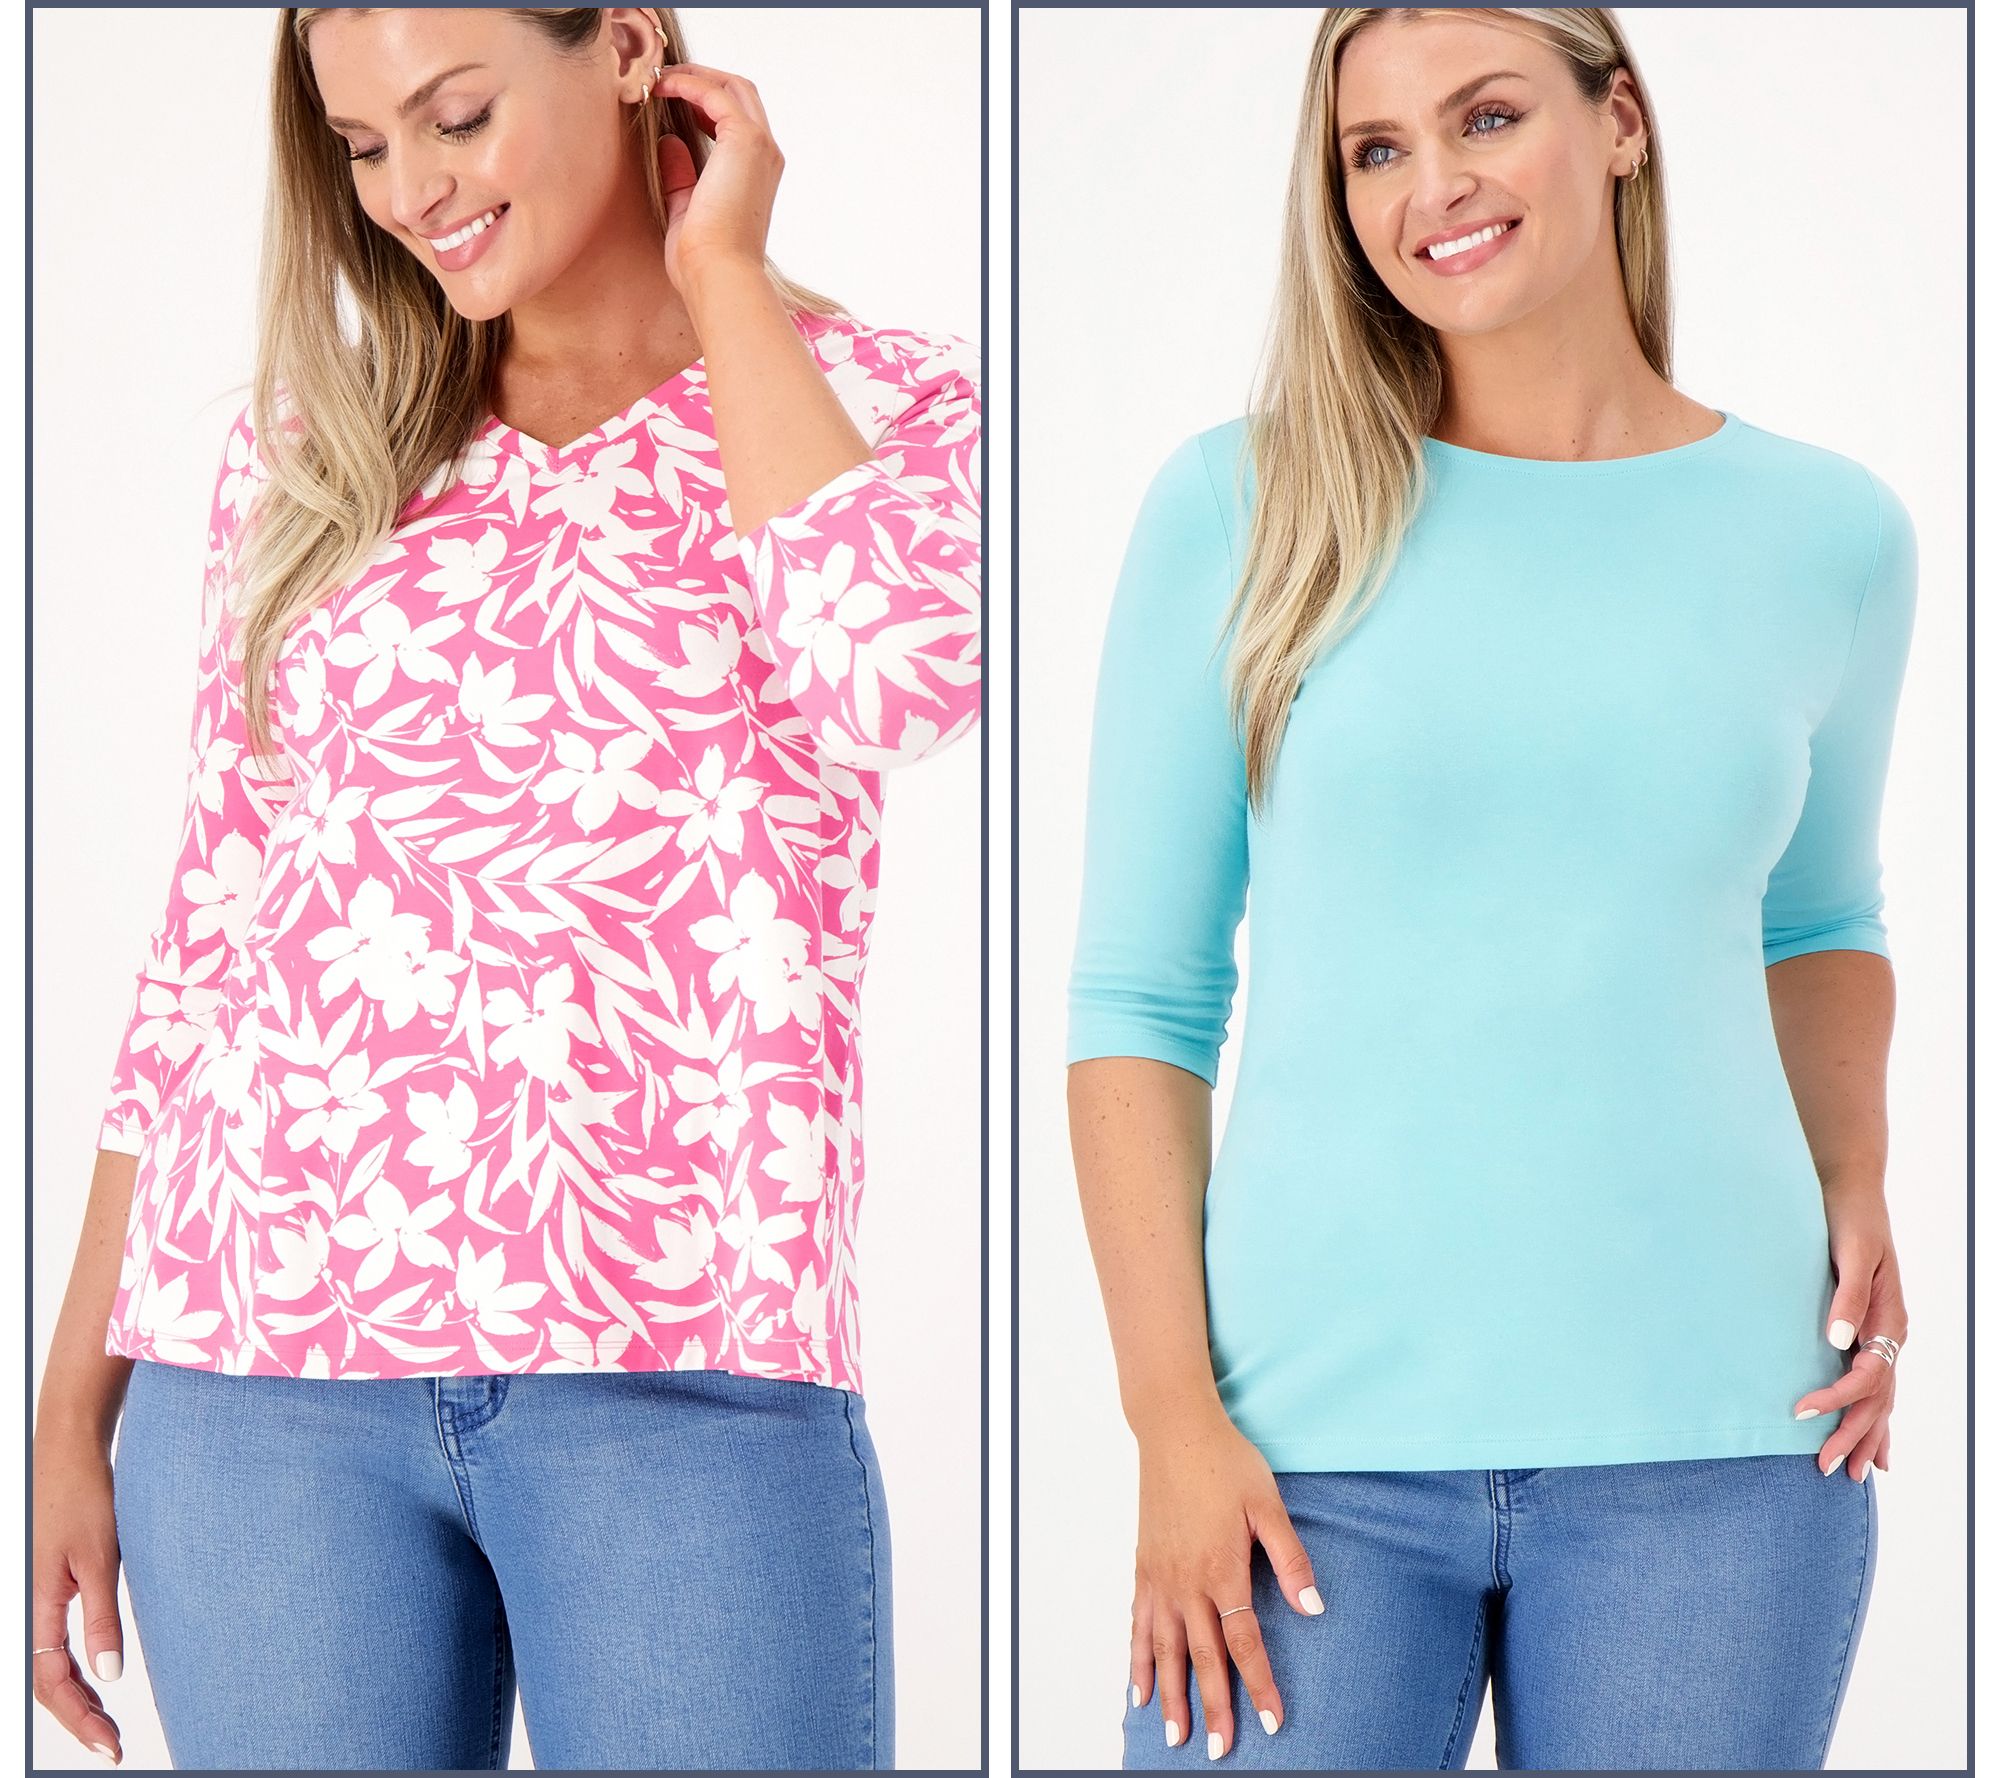 Denim & Co. Essentials Favorite Jersey Set of Two Knit Tops 